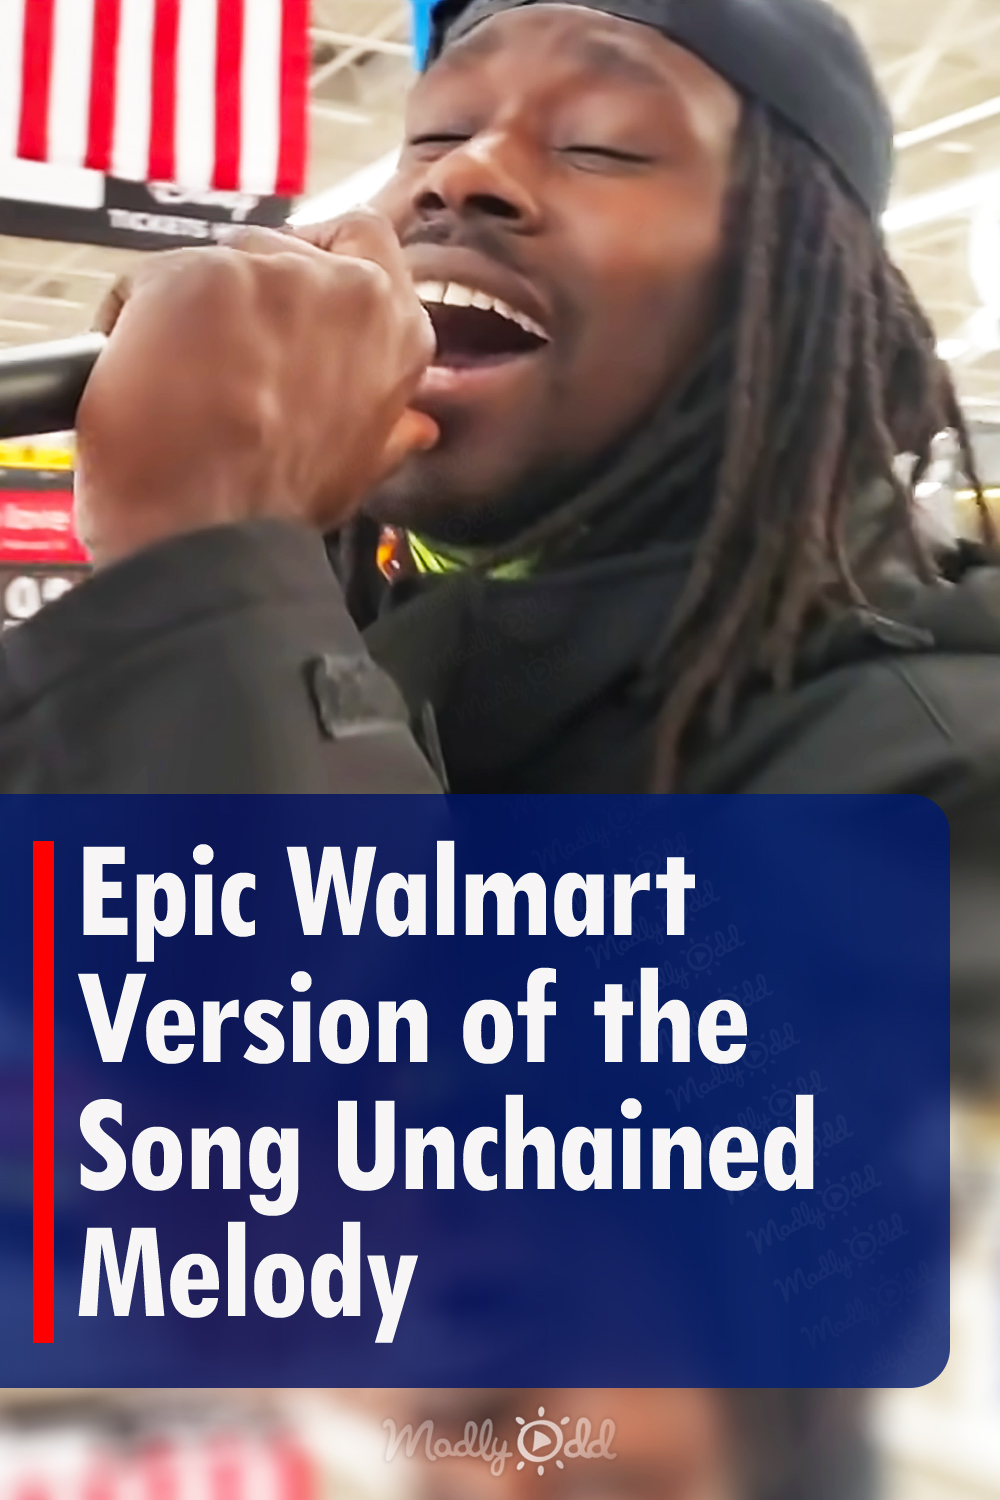 Epic Walmart Version of the Song Unchained Melody